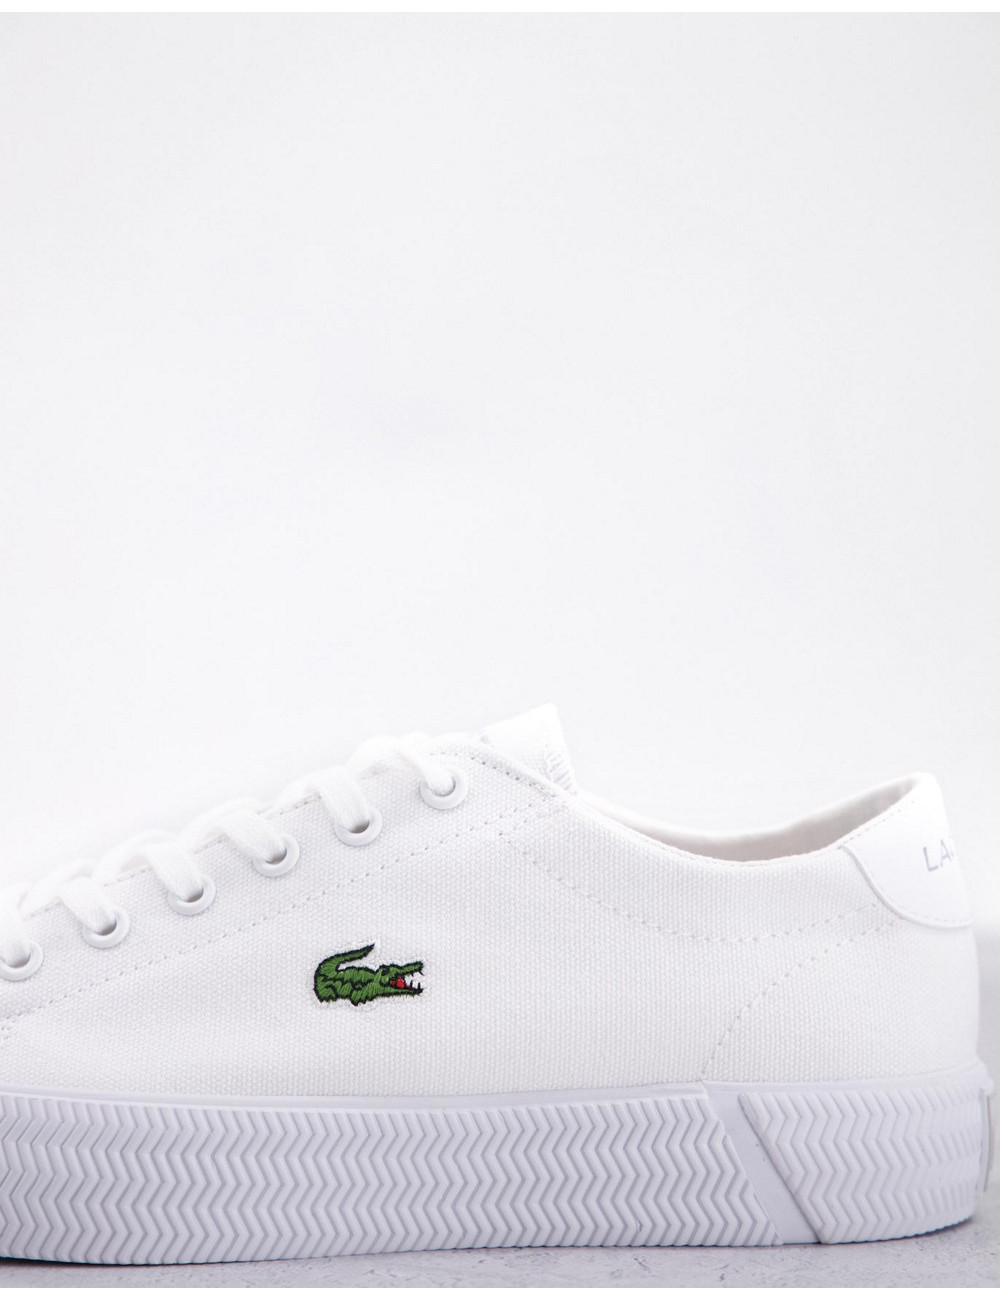 Lacoste Gripshot leather...